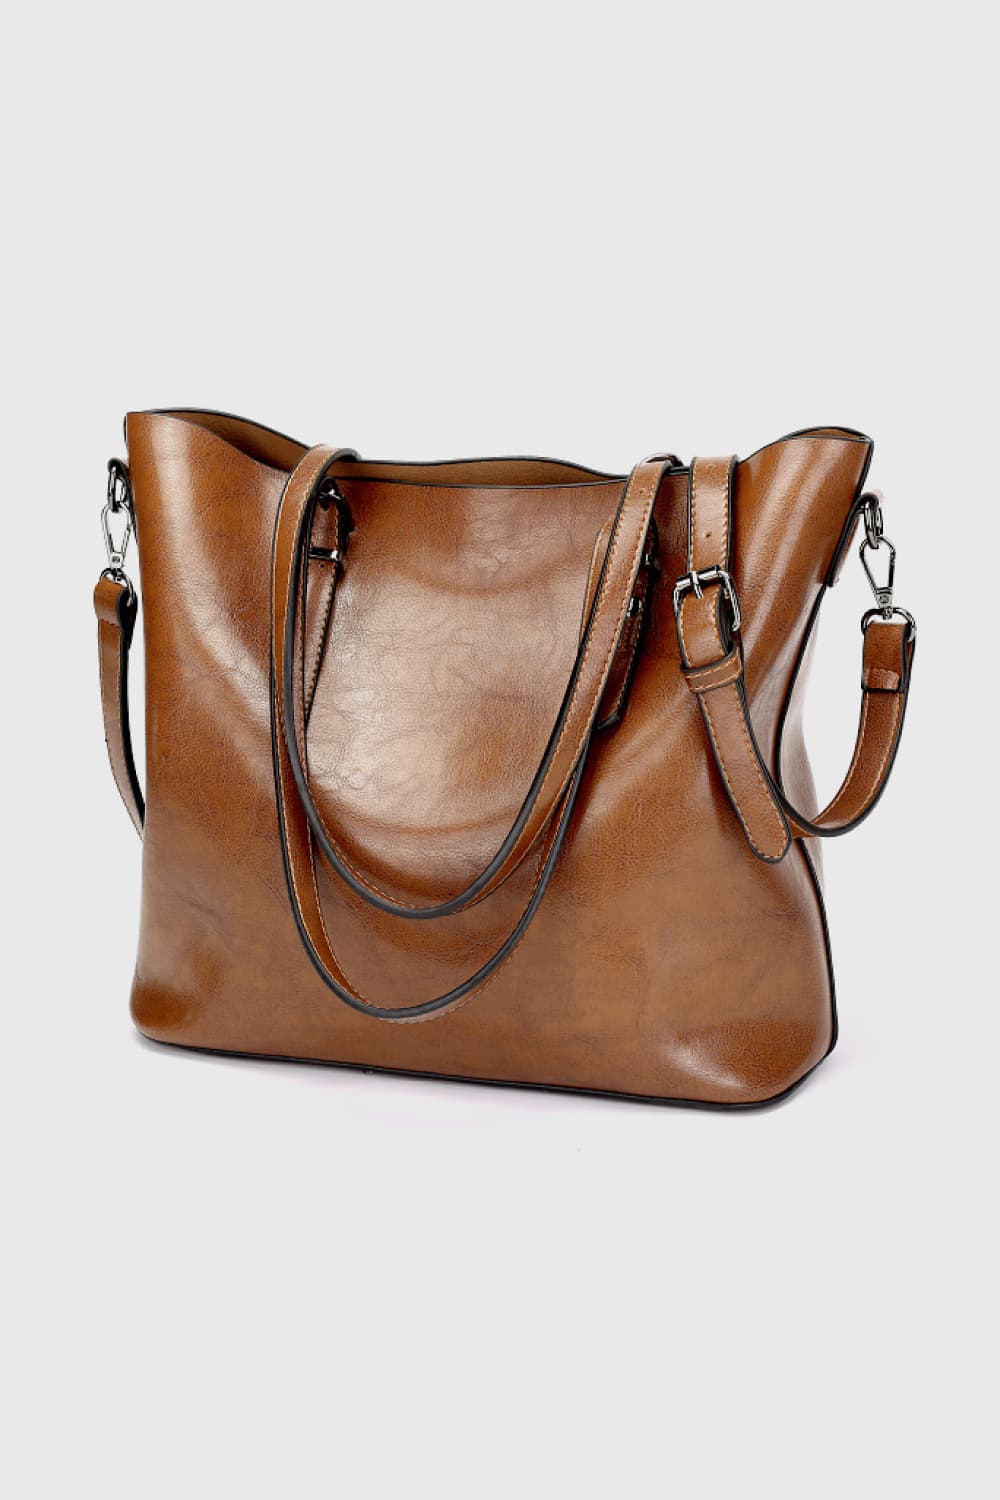 CHESTNUT ONE SIZE - Brown PU Leather Tote Bag - handbag at TFC&H Co.